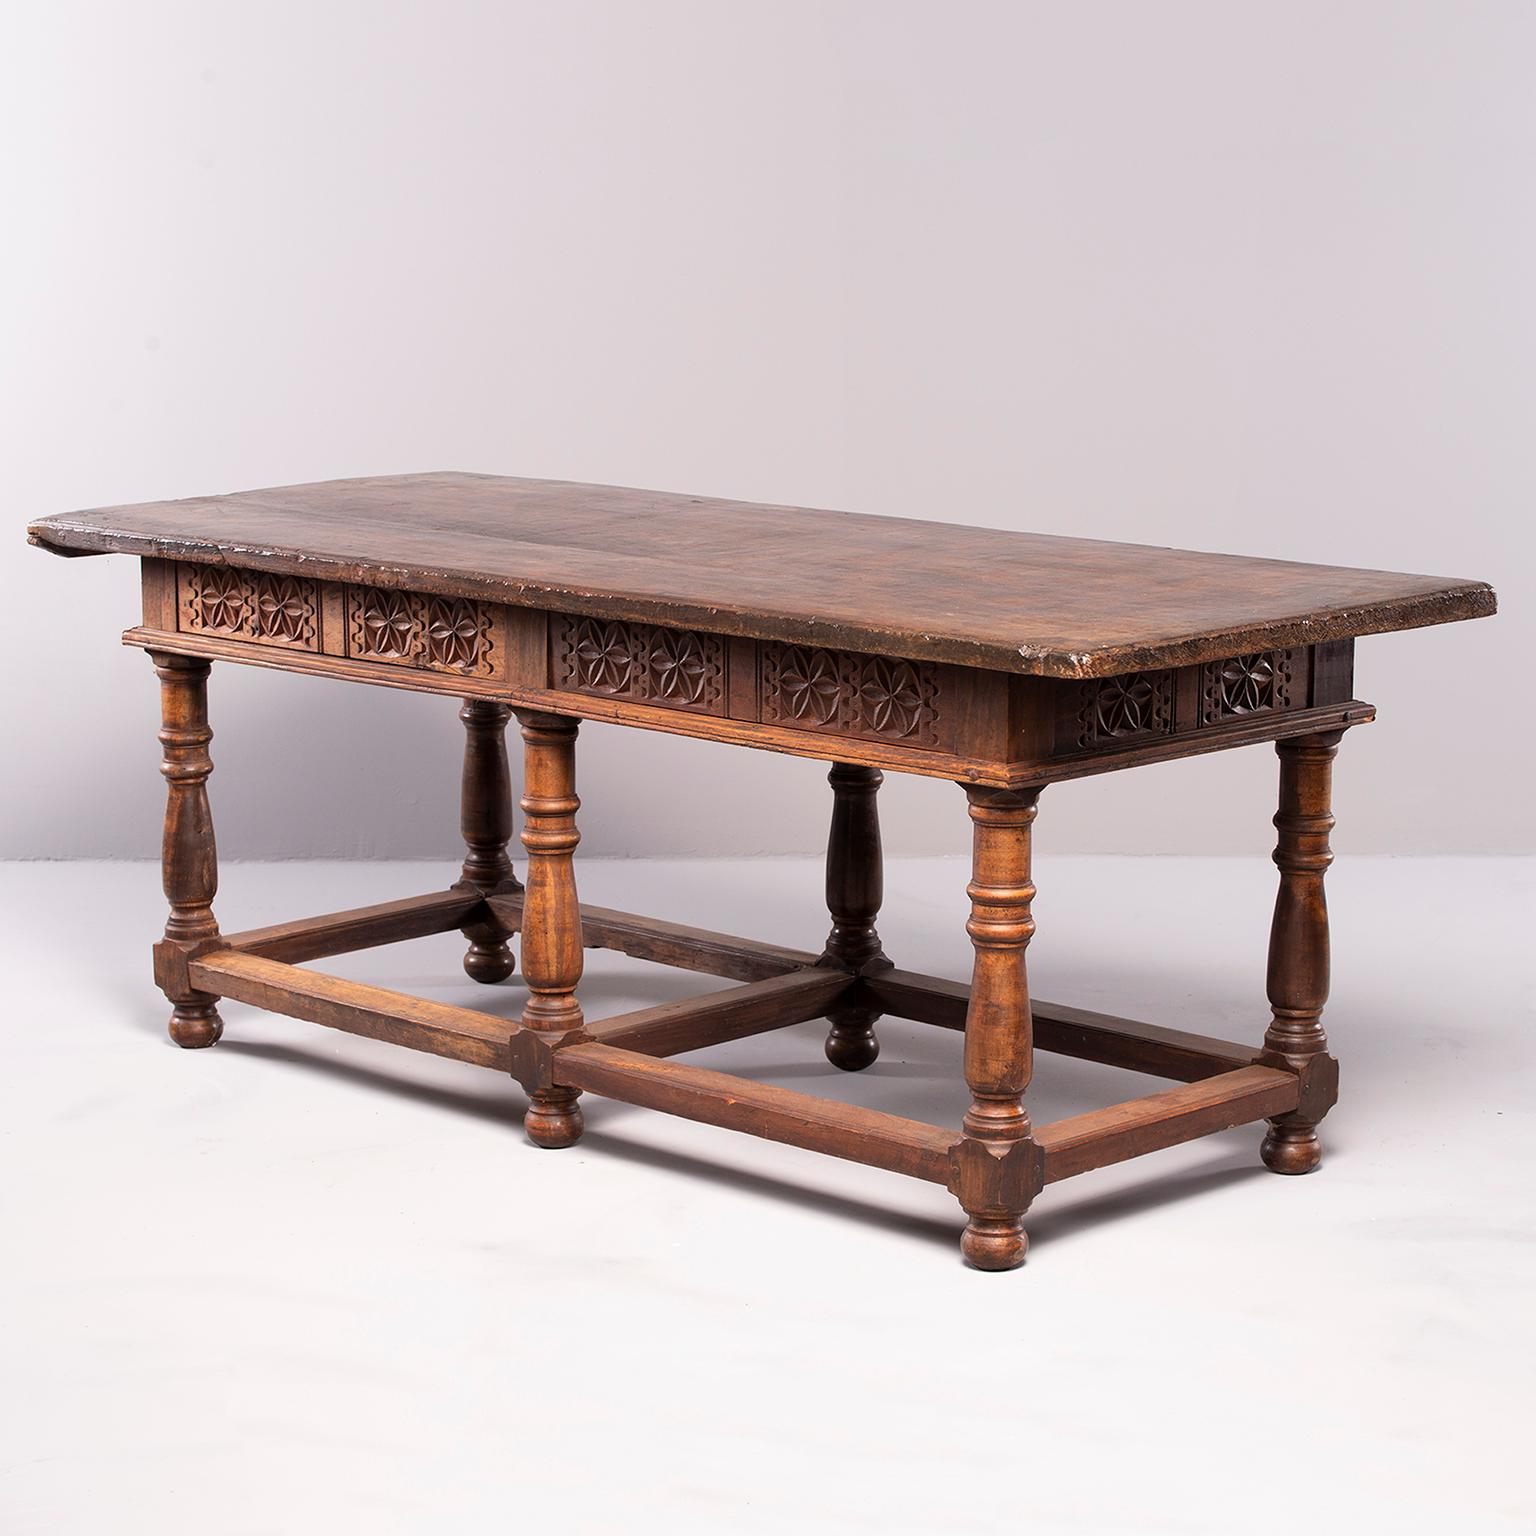  Portuguese All Original 18th Century Carved Walnut Table 11